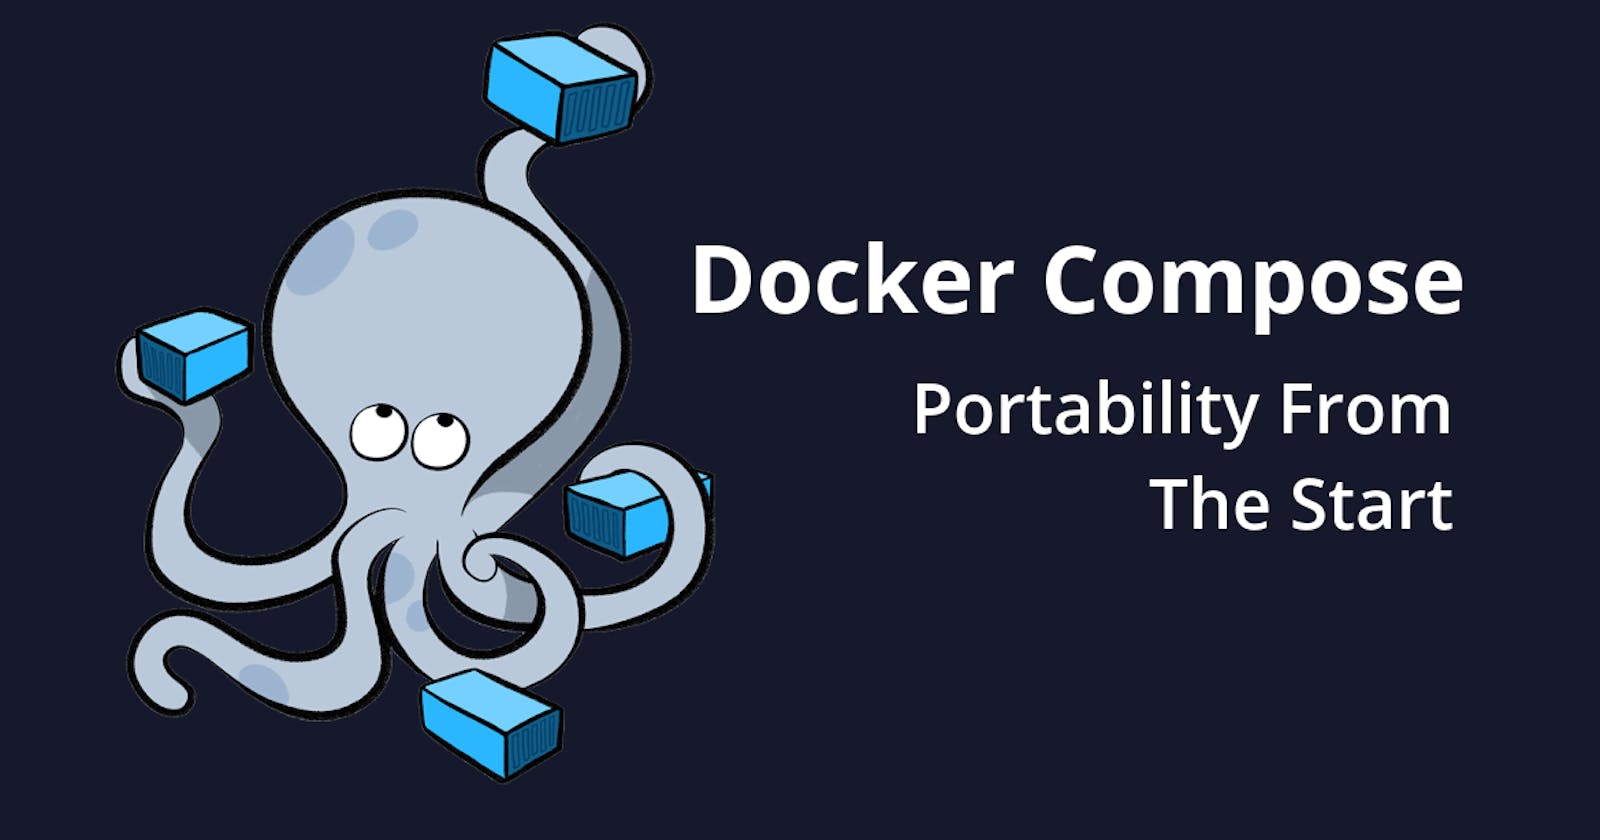 Docker Compose: Simplifying Multi-Container Docker Applications